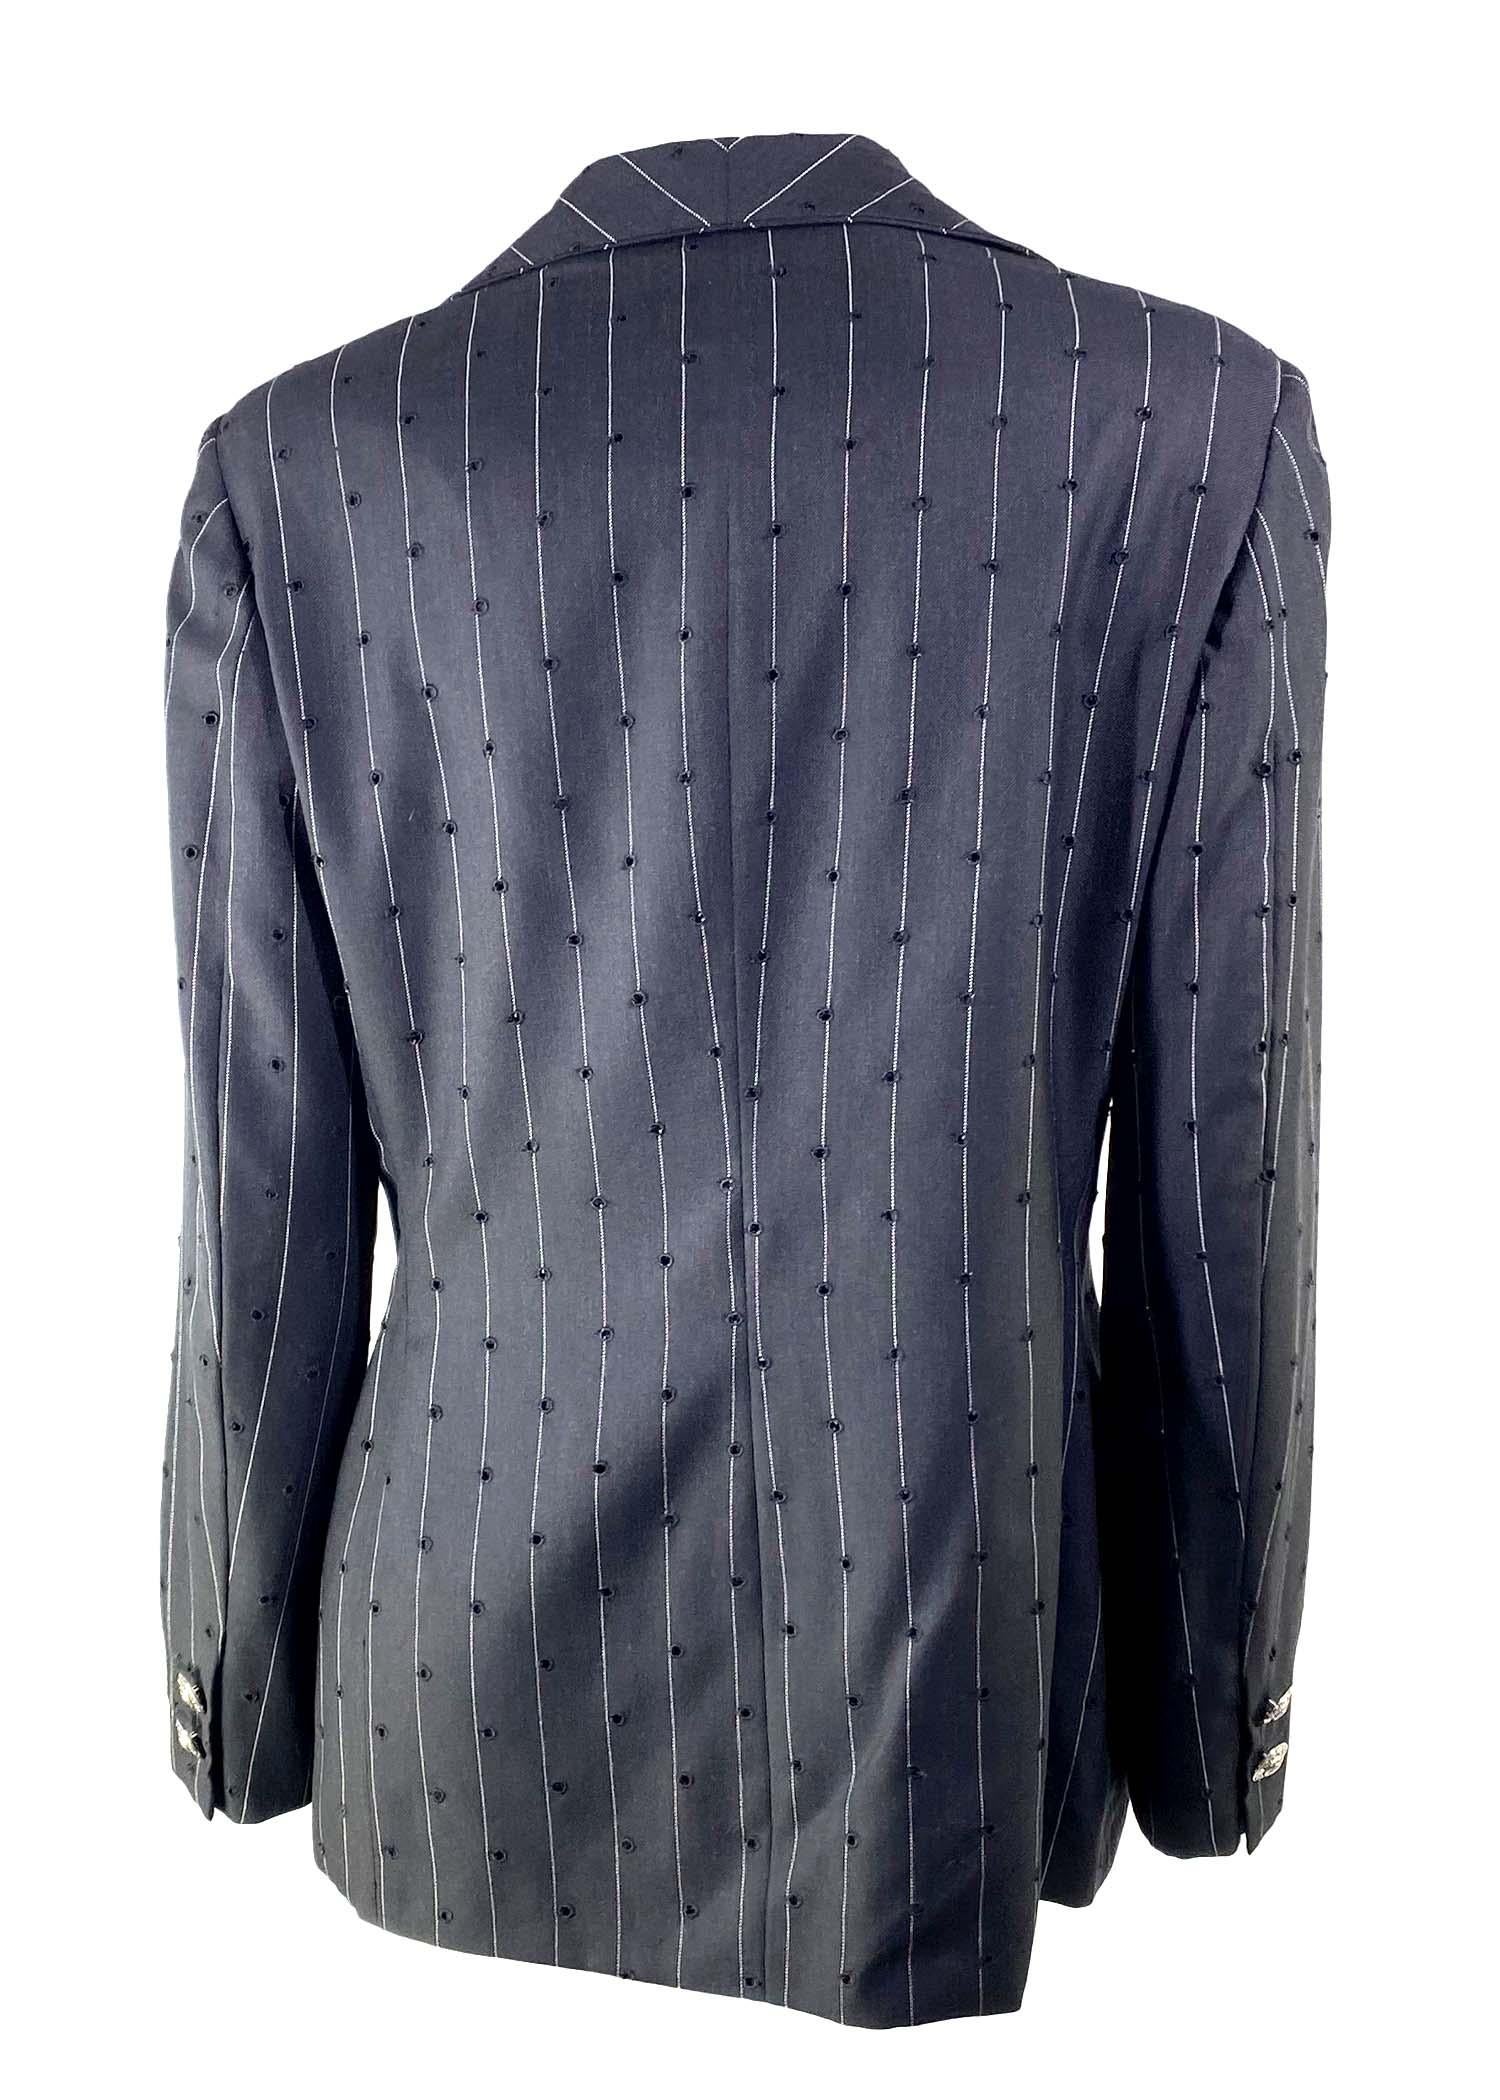 Black S/S 1994 Gianni Versace Couture Perforated Punk Pinstripe Medusa Wool Blazer For Sale